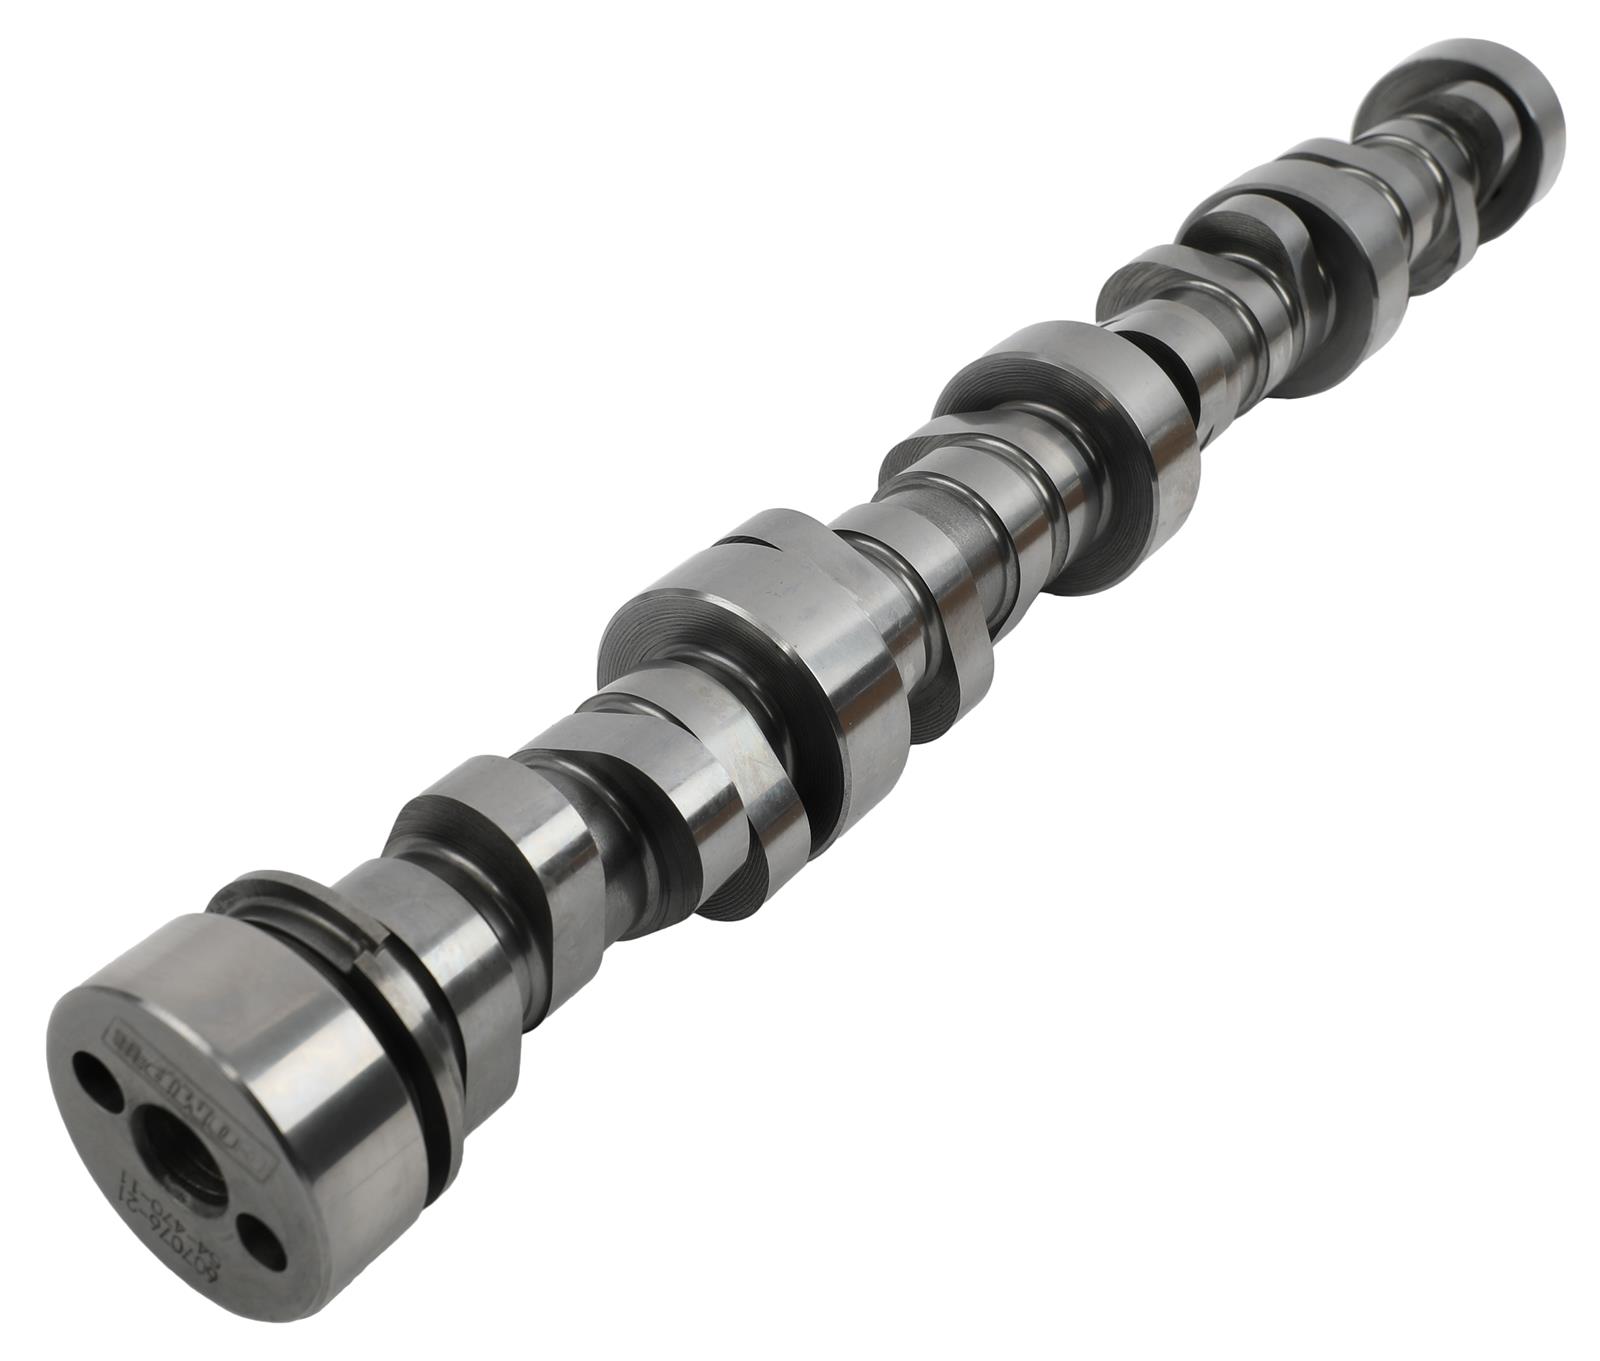 COMP Cams 54-470-11 COMP Cams LSR Series Hydraulic Roller Camshafts |  Summit Racing